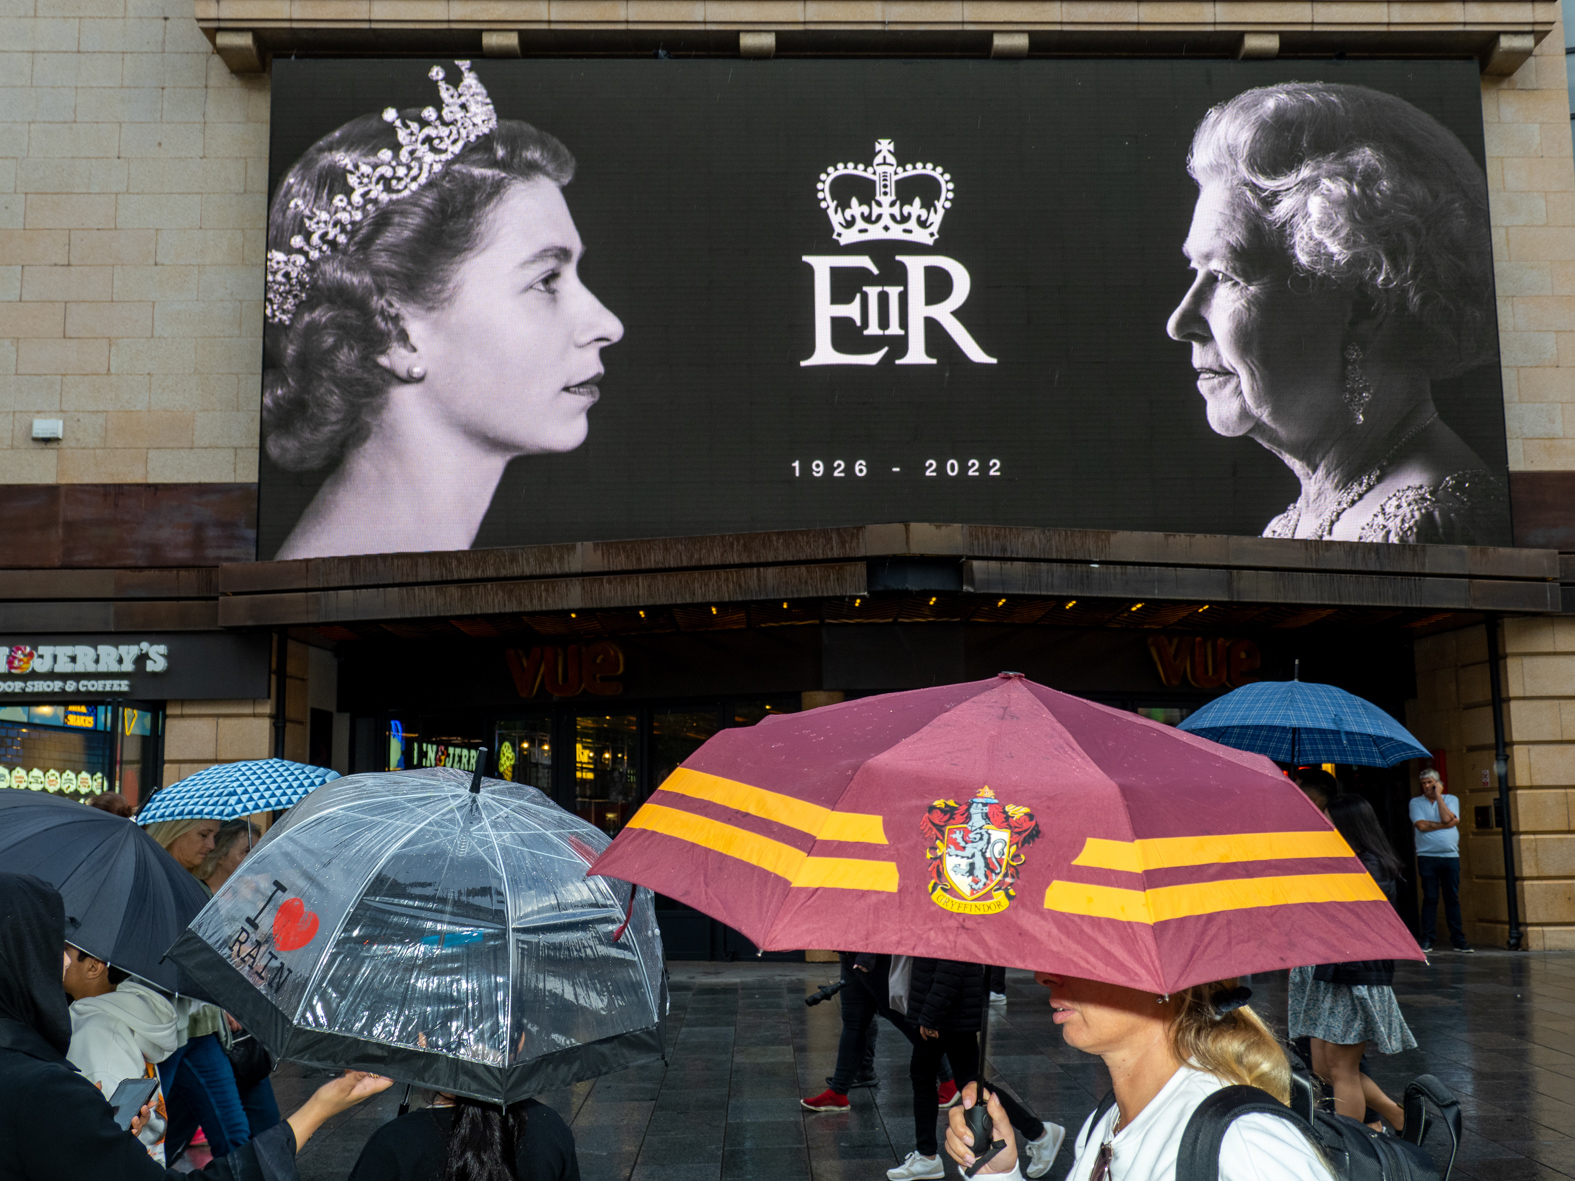 Remembering the Queen Elizabeth II in central London on the 9th September in London, United Kingdom following her death at the age of 96. (photo by Peter Dench/Getty Images)